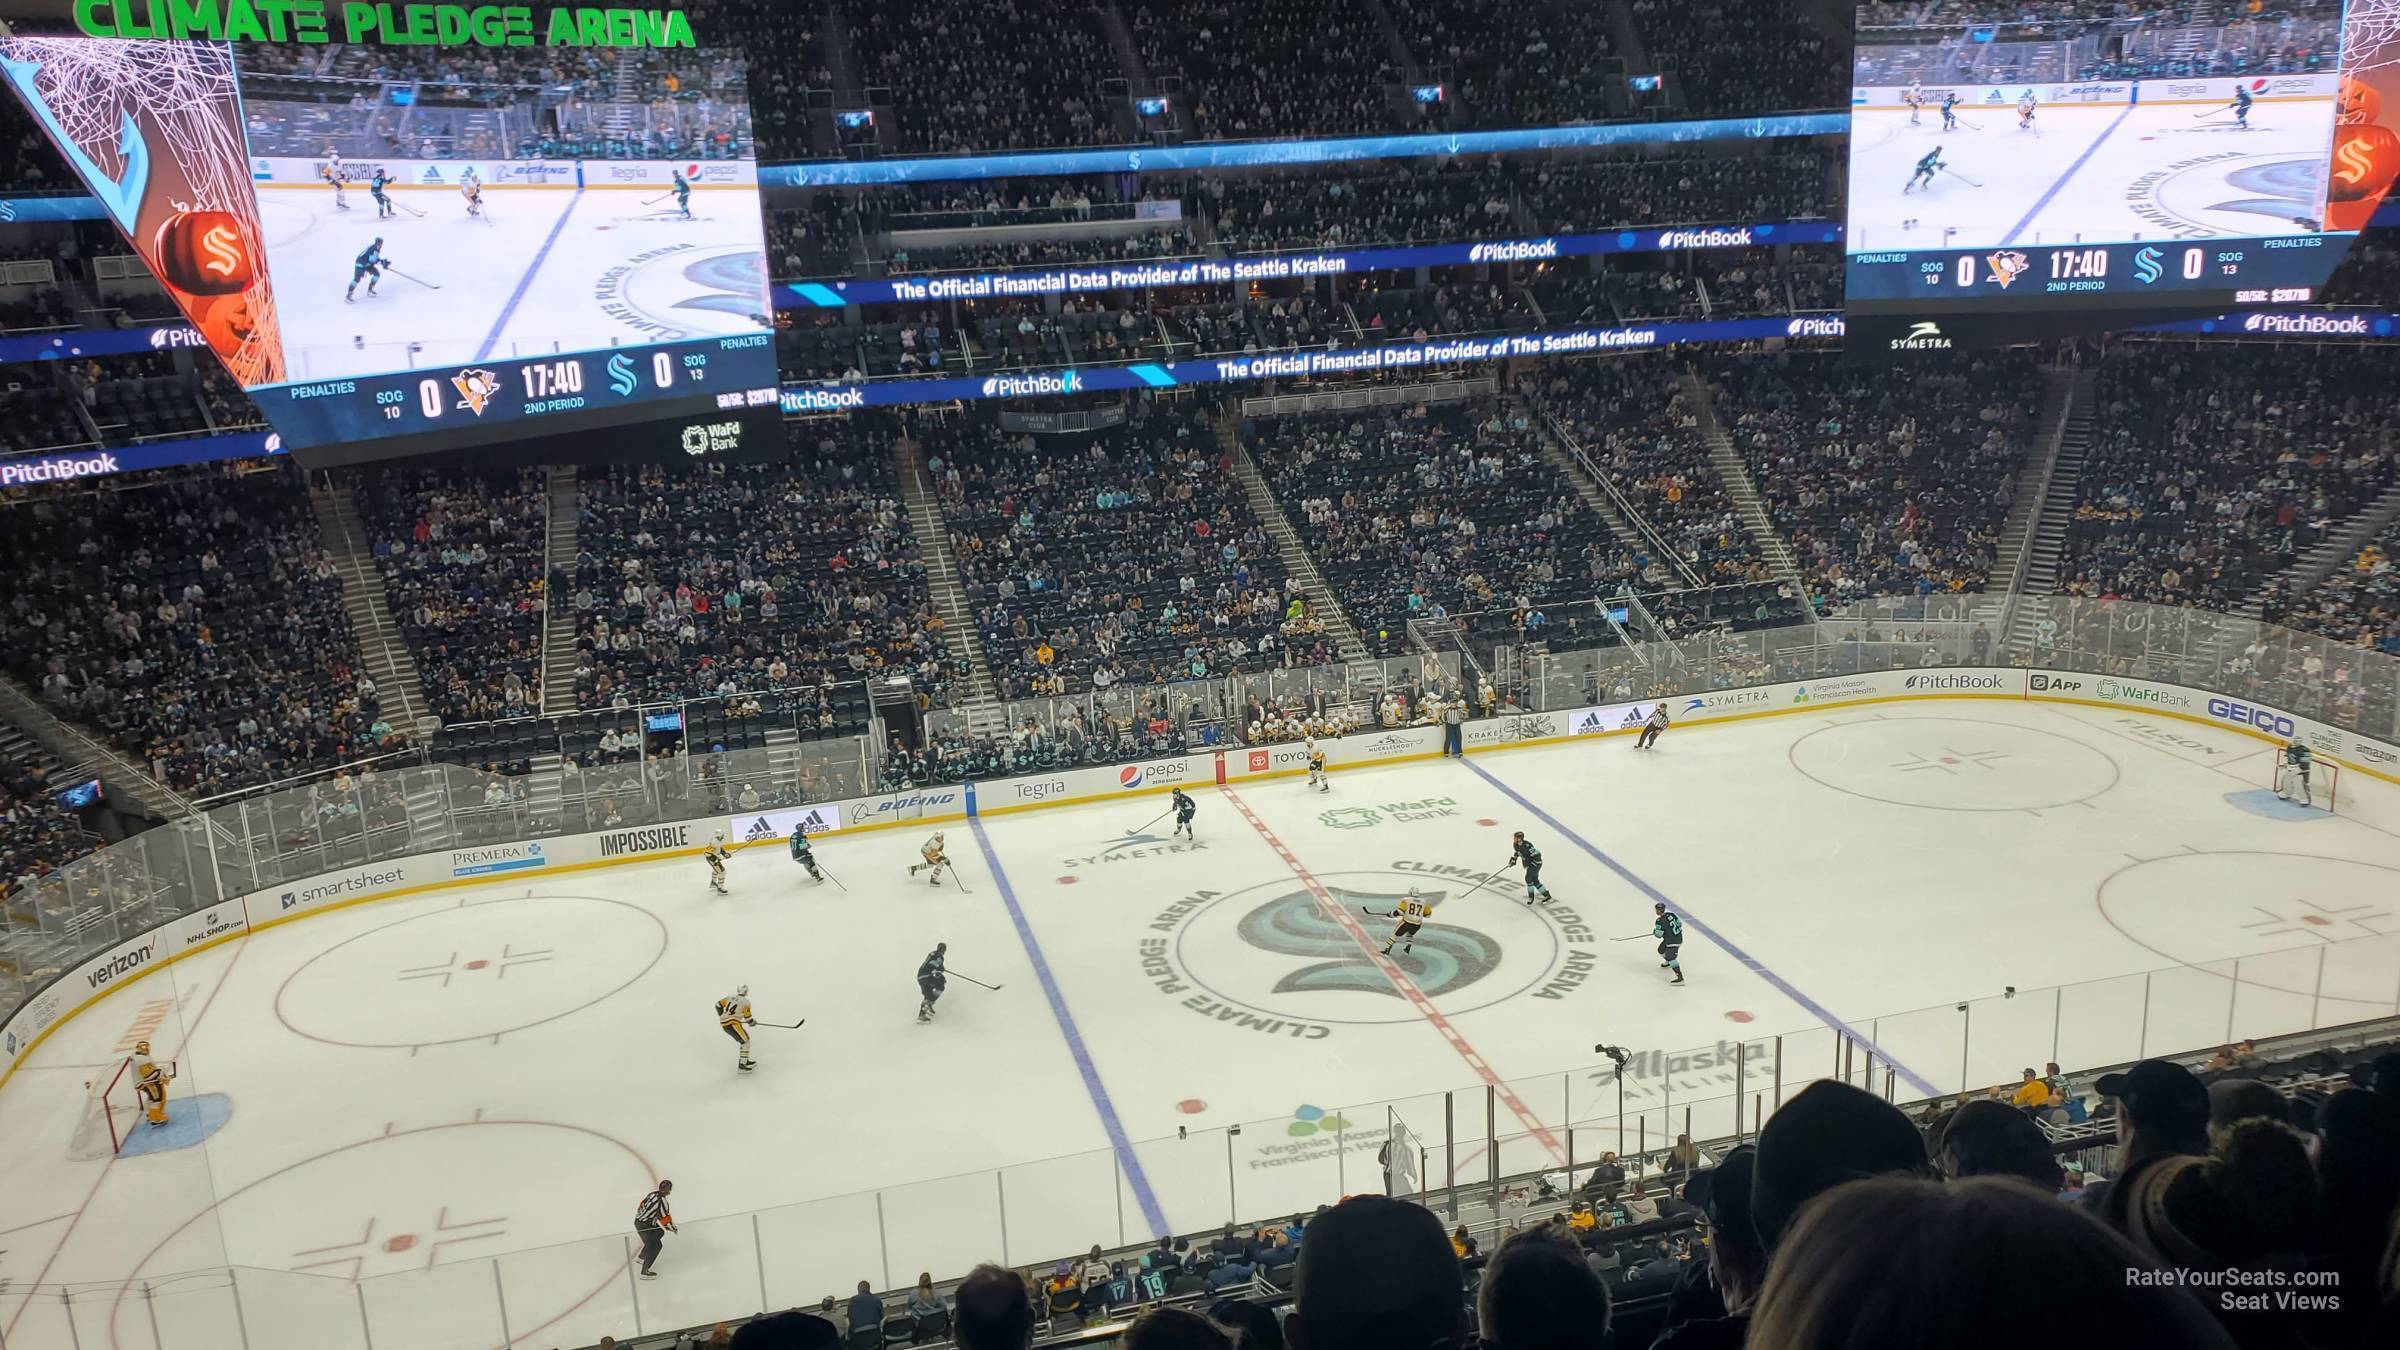 section 115, row bar seat view  for hockey - climate pledge arena